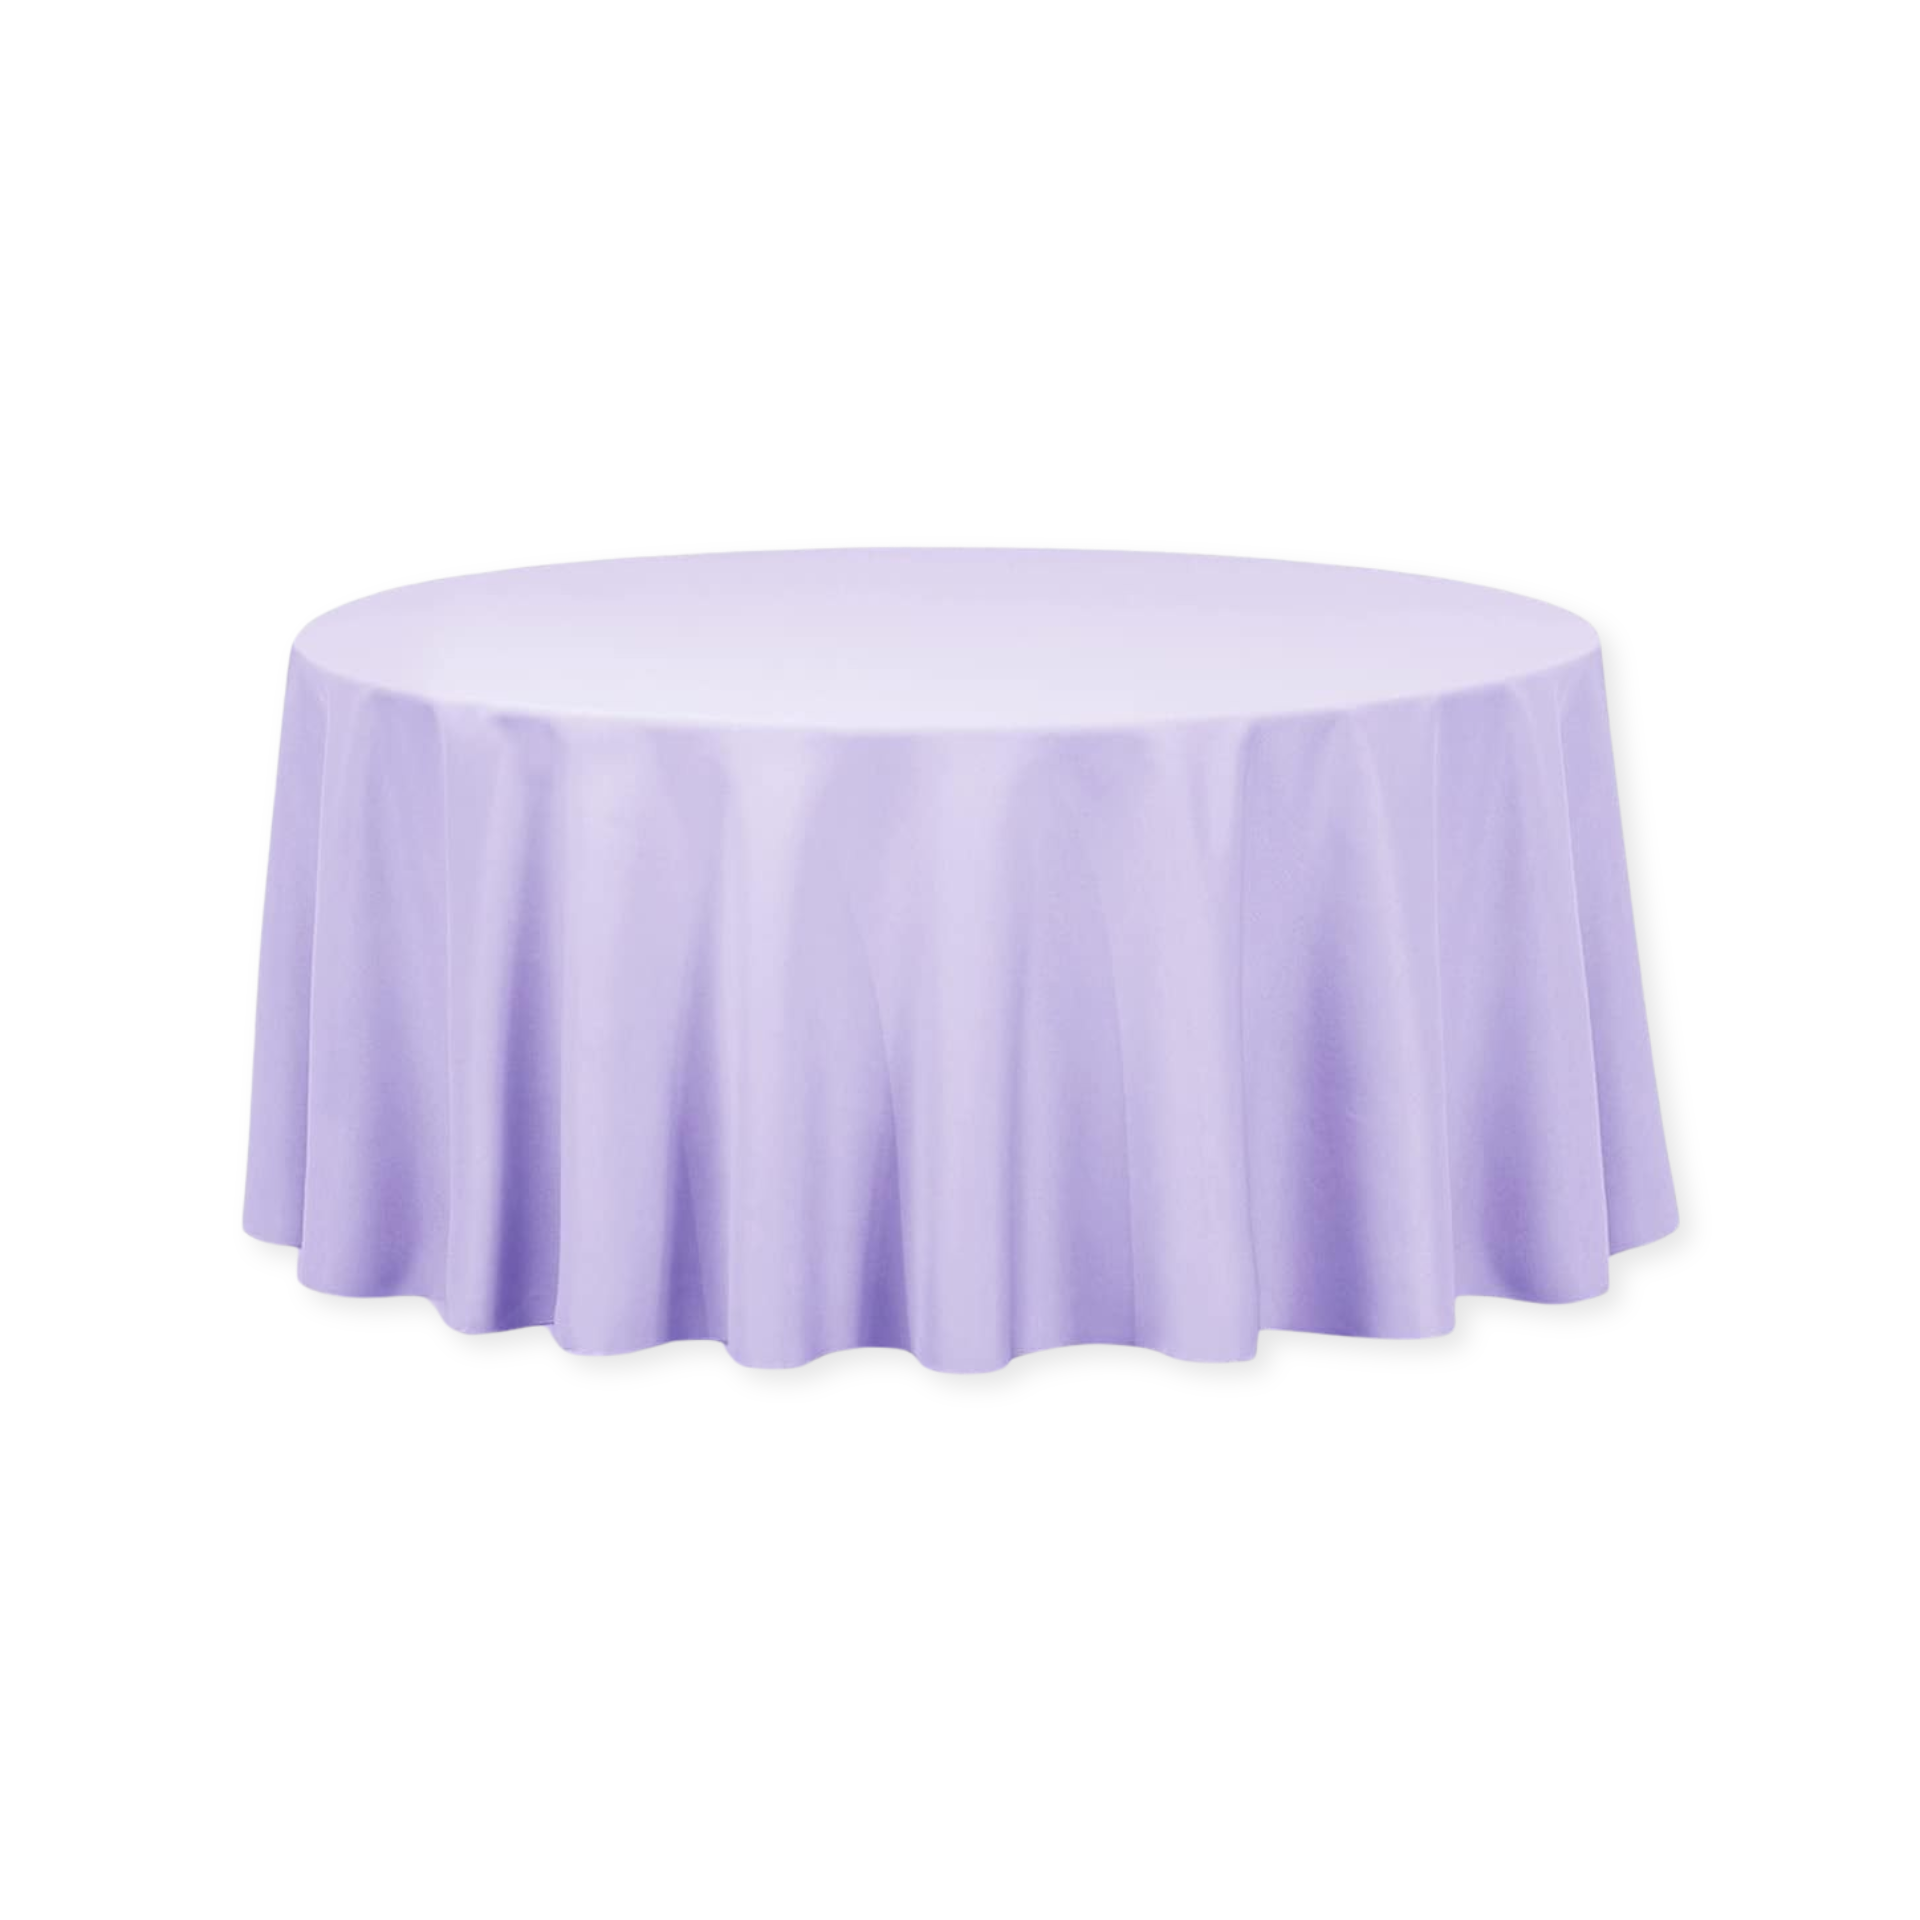 Tablecloth polyester round purple commercial grade wedding party event rental panama city beach